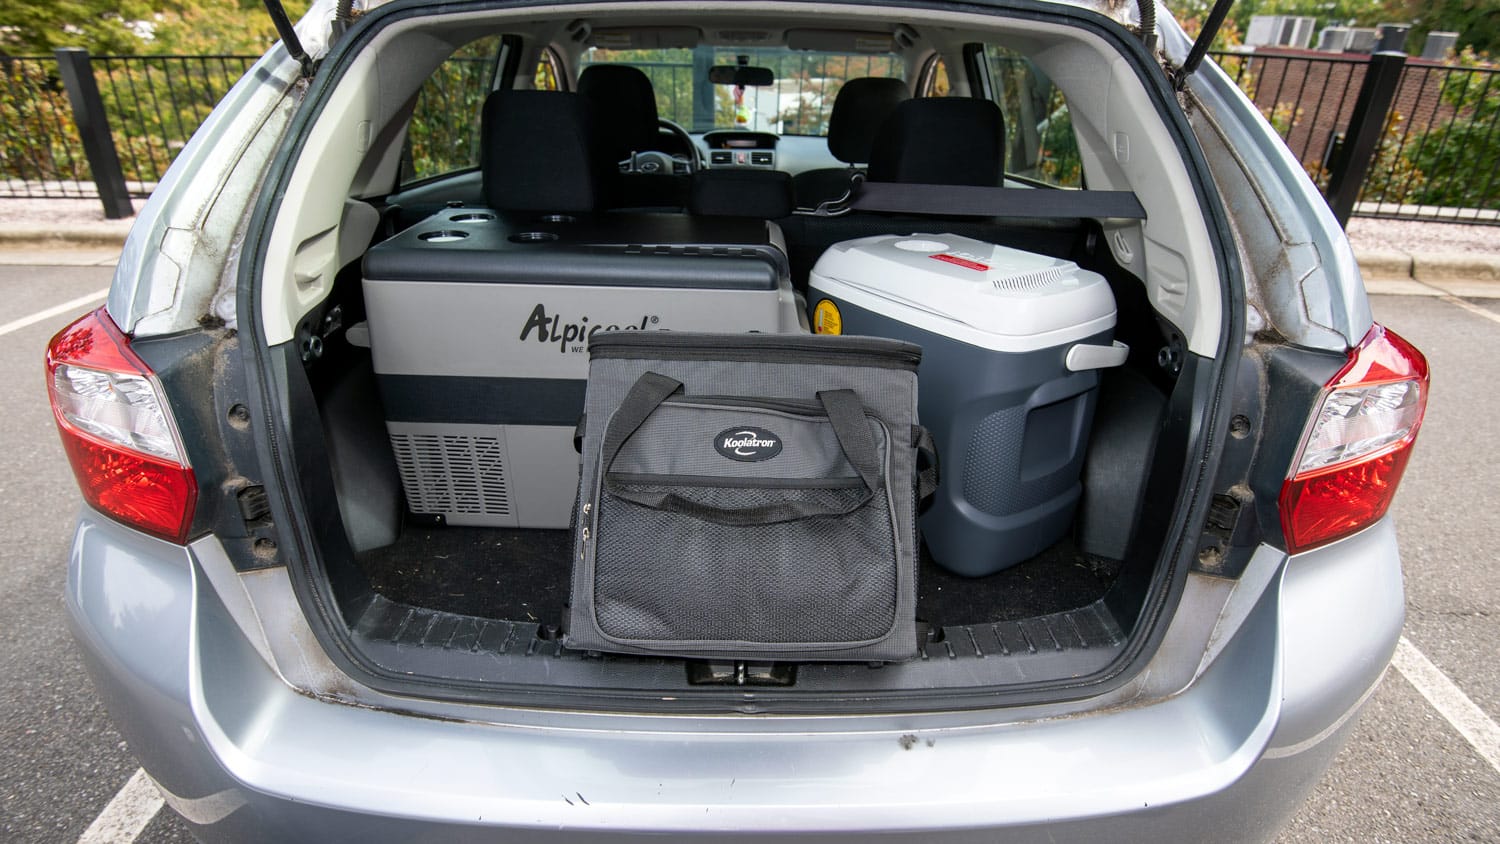 Picture of an open trunk of a car containing several 12V coolers